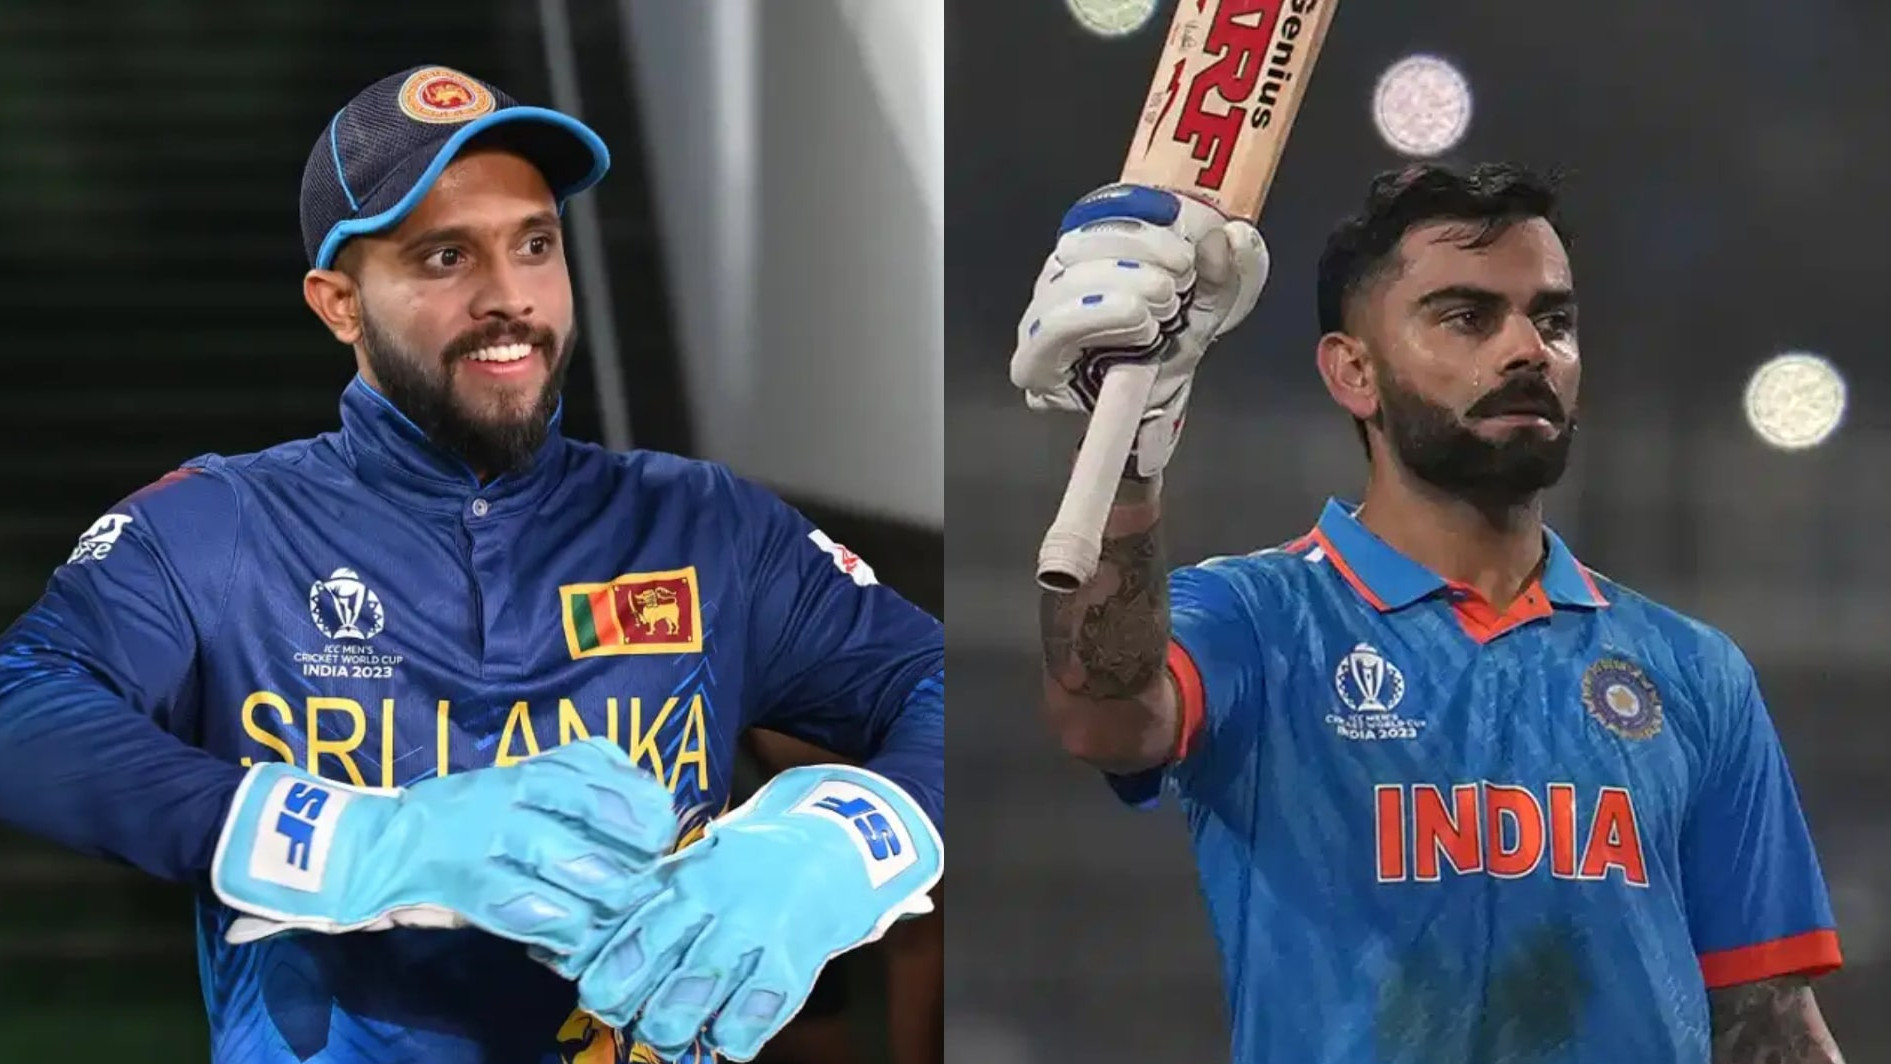 CWC 2023: “What I said was absolutely wrong”- Kusal Mendis on ‘Why would I congratulate’ remark after Virat Kohli’s 49th ODI ton